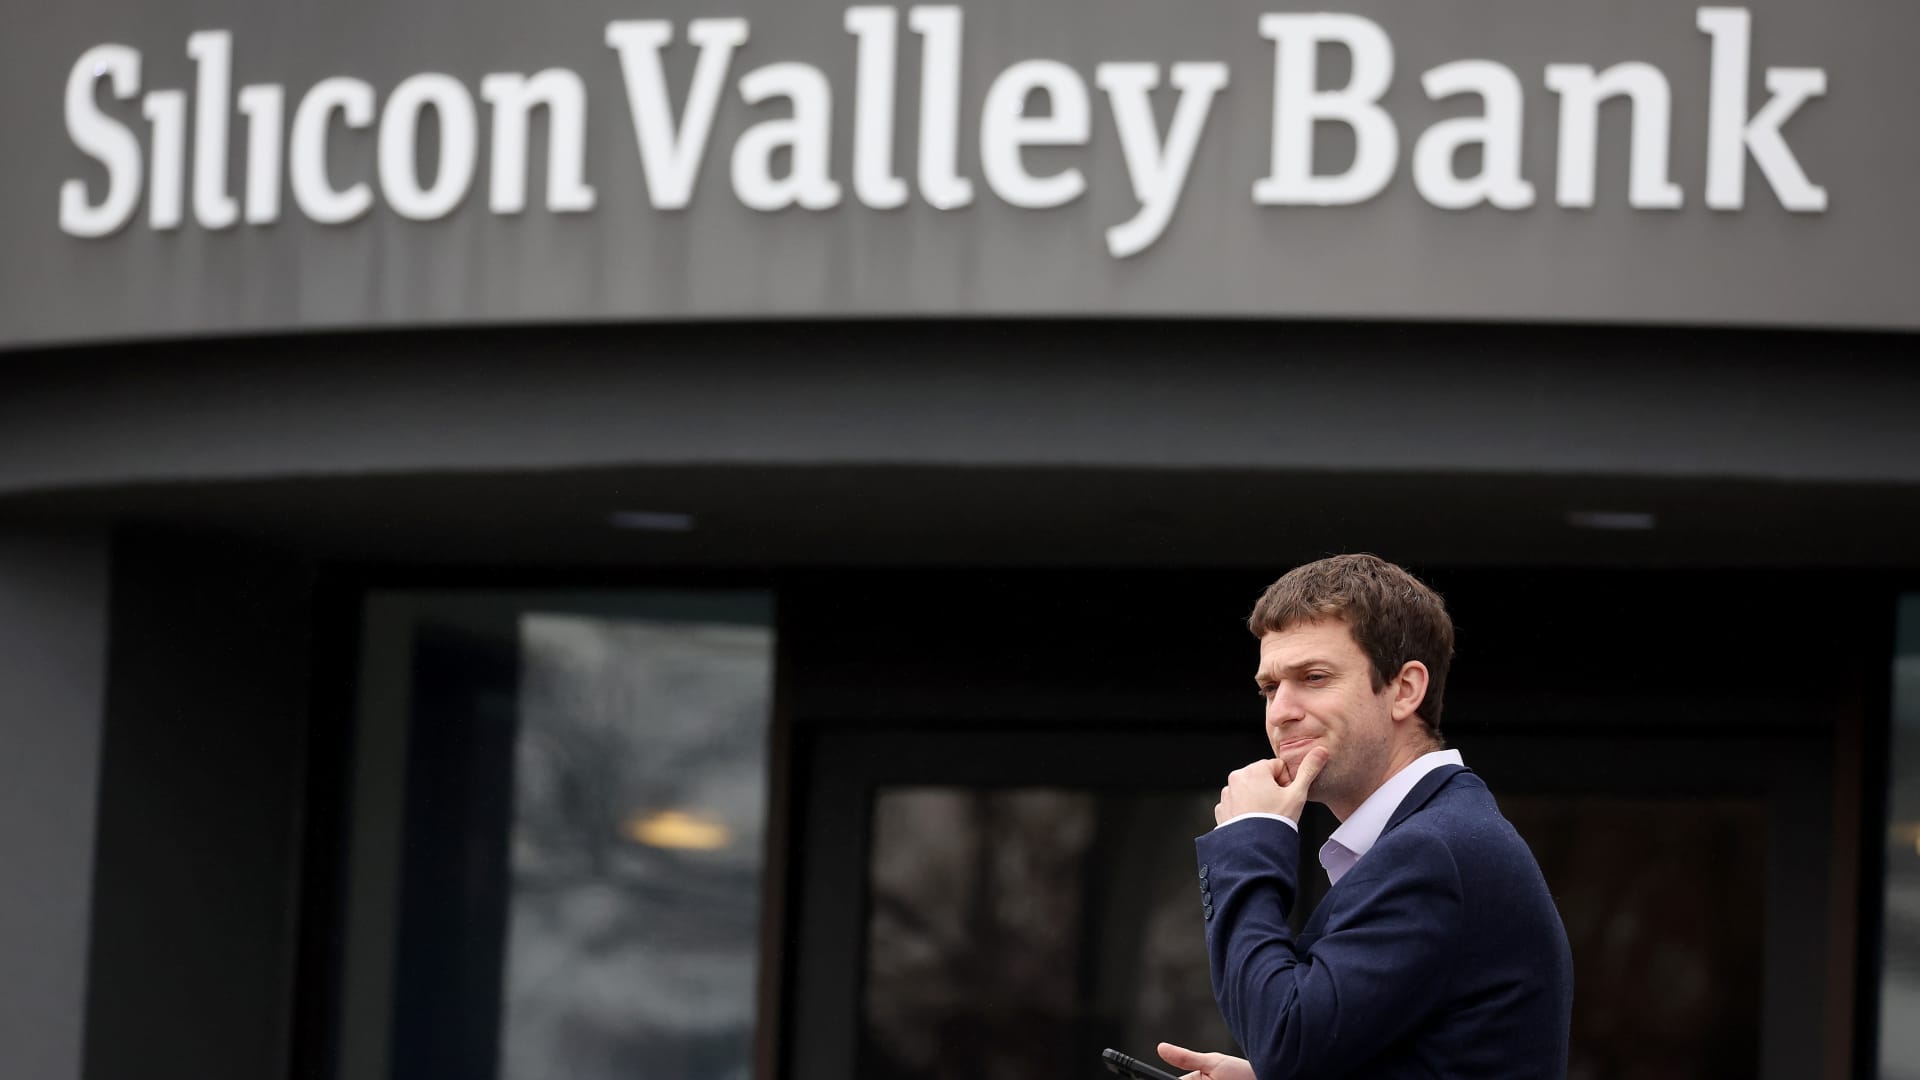 A customer stands outside of a shuttered Silicon Valley Bank (SVB) headquarters on March 10, 2023 in Santa Clara, California.